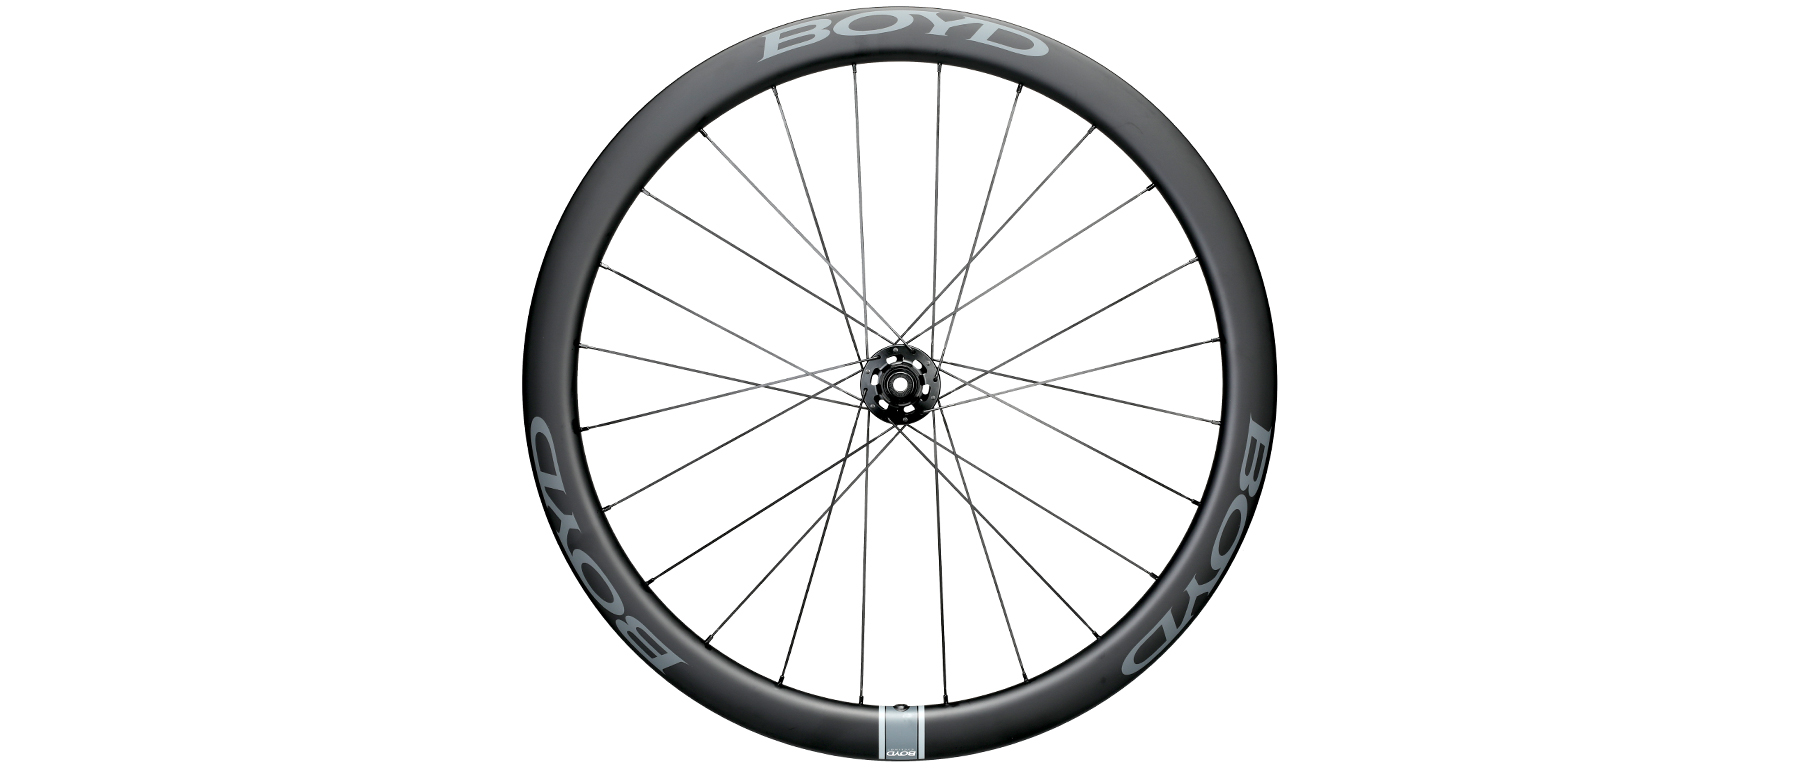 Boyd Cycling Prologue 44mm Carbon Disc Wheelset